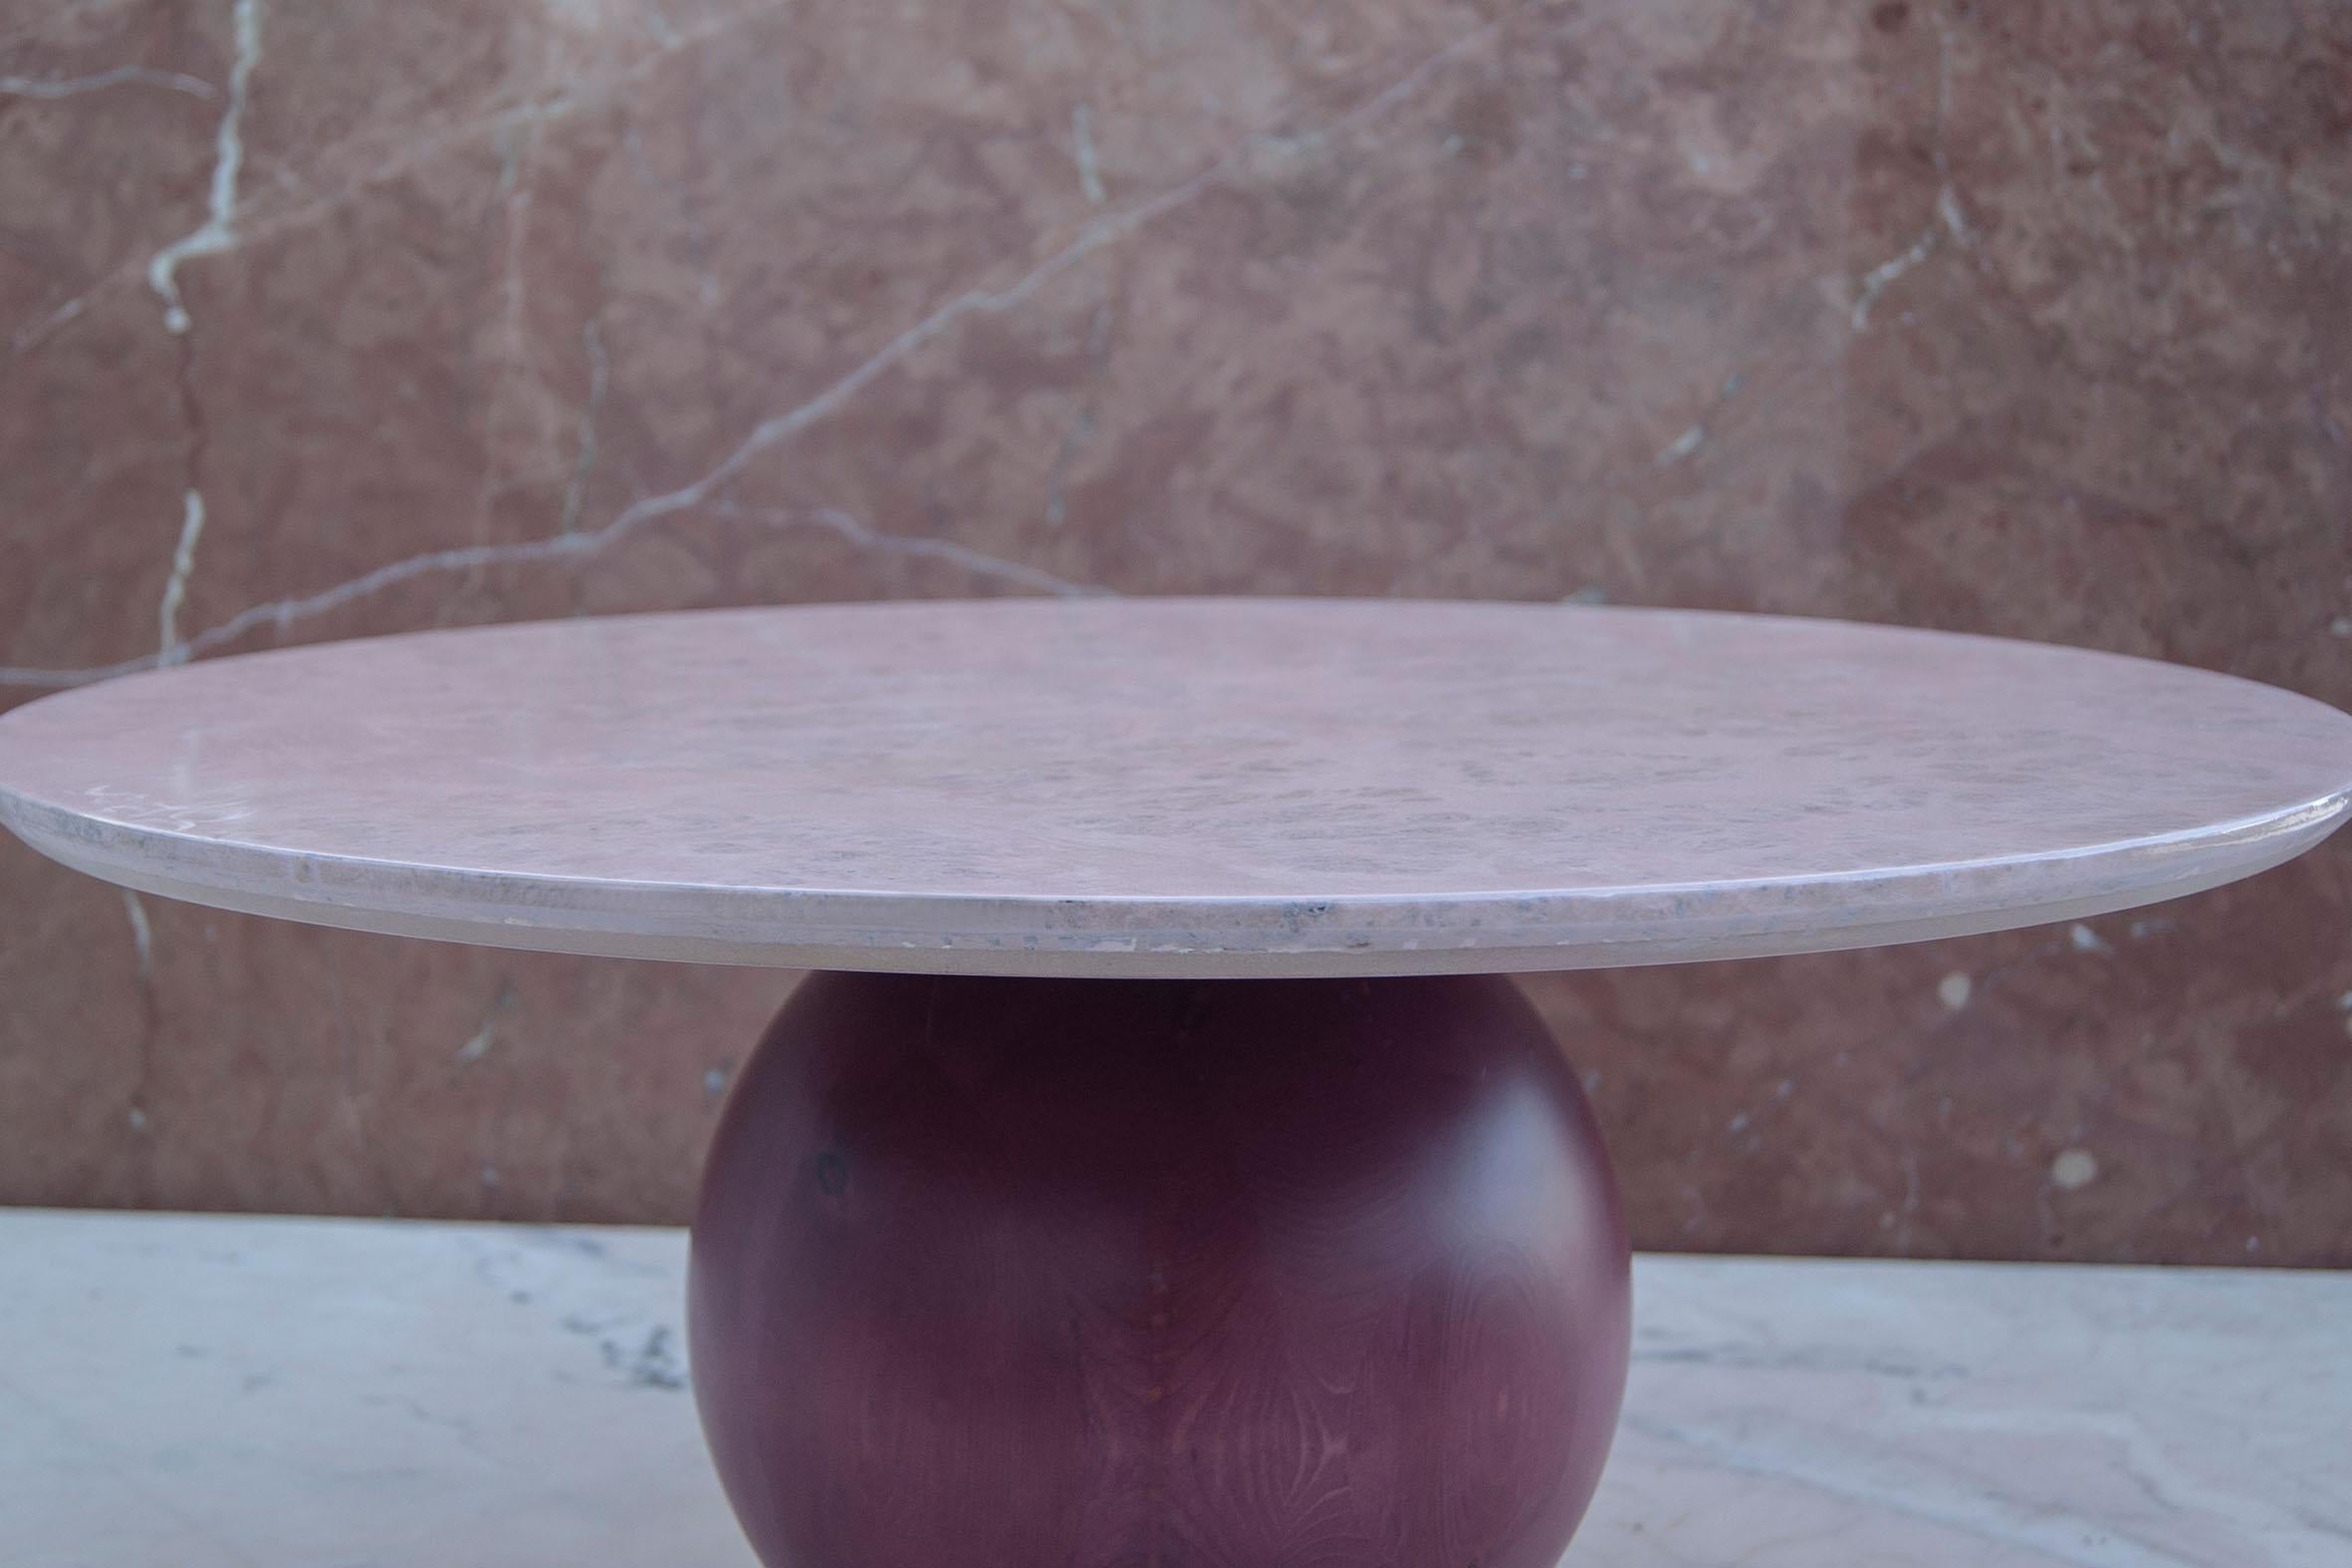 Cypriot Sphere Table by Studio Christinekalia For Sale